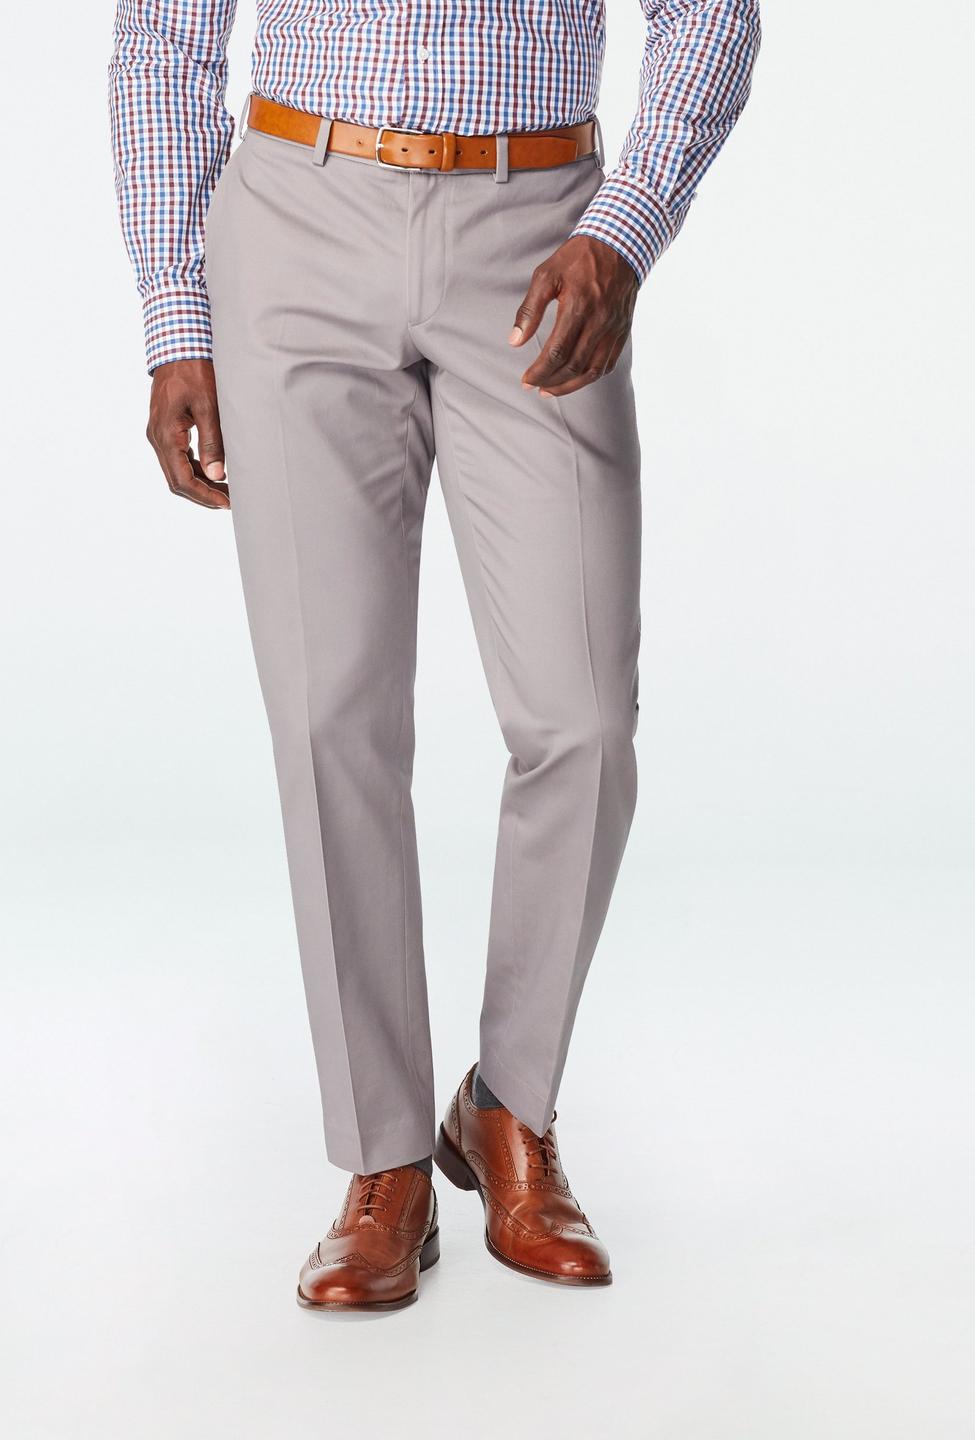 Gray pants - Houndslow Solid Design from Premium Indochino Collection